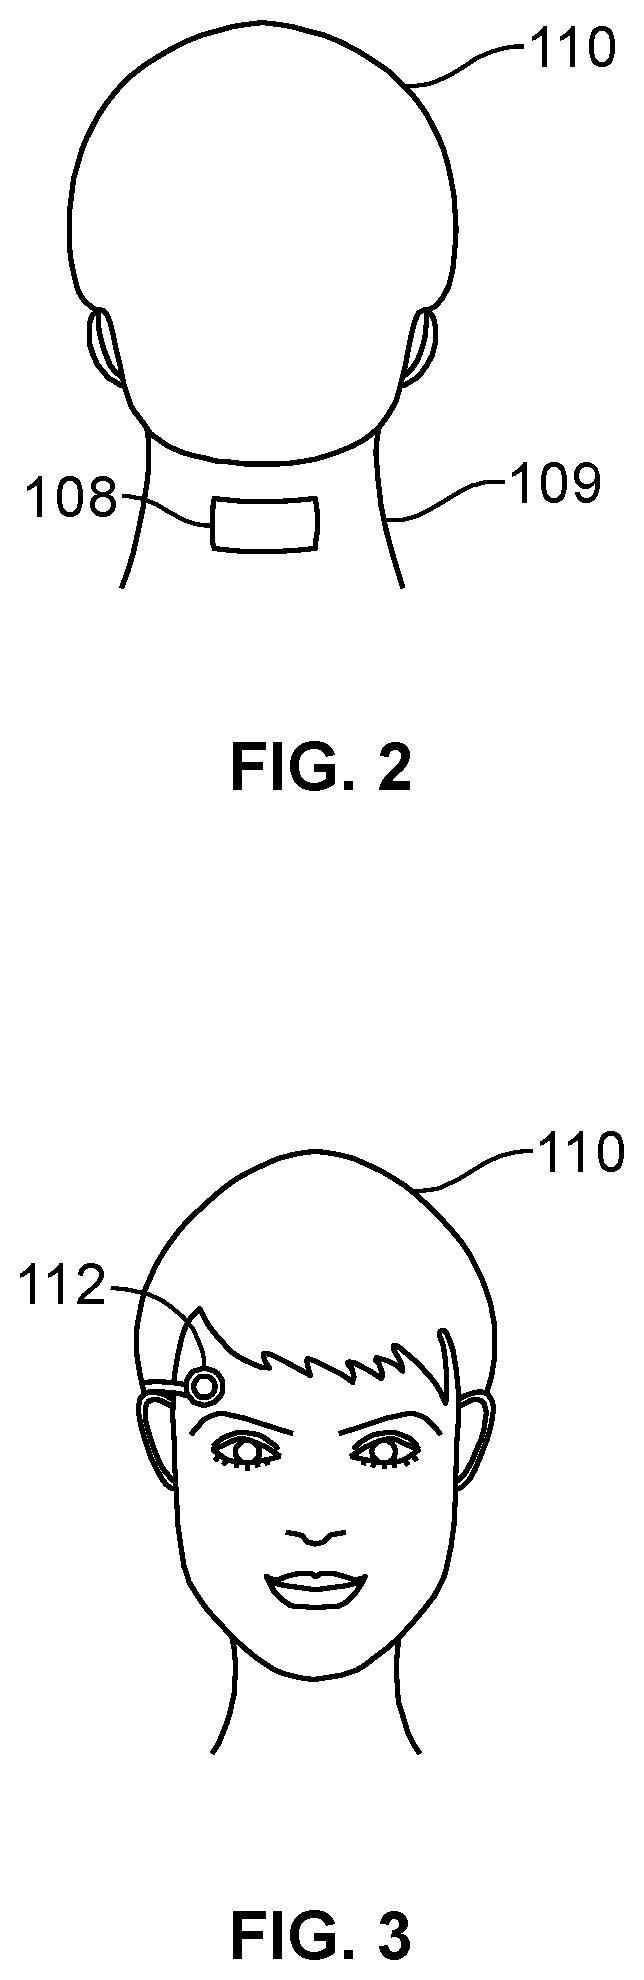 System and method for enhancing sensory function